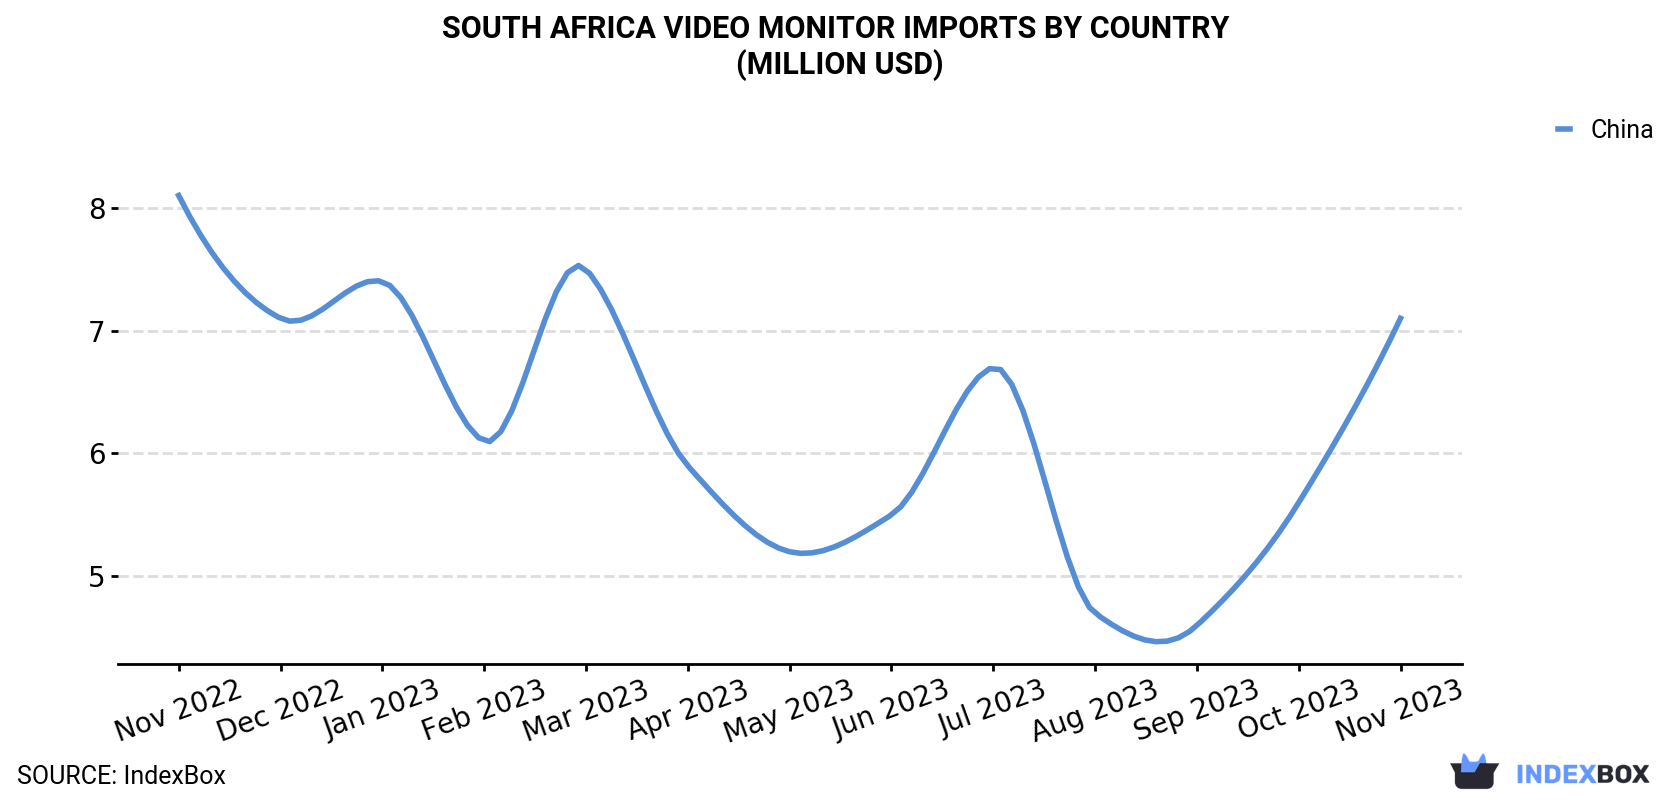 South Africa Video Monitor Imports By Country (Million USD)